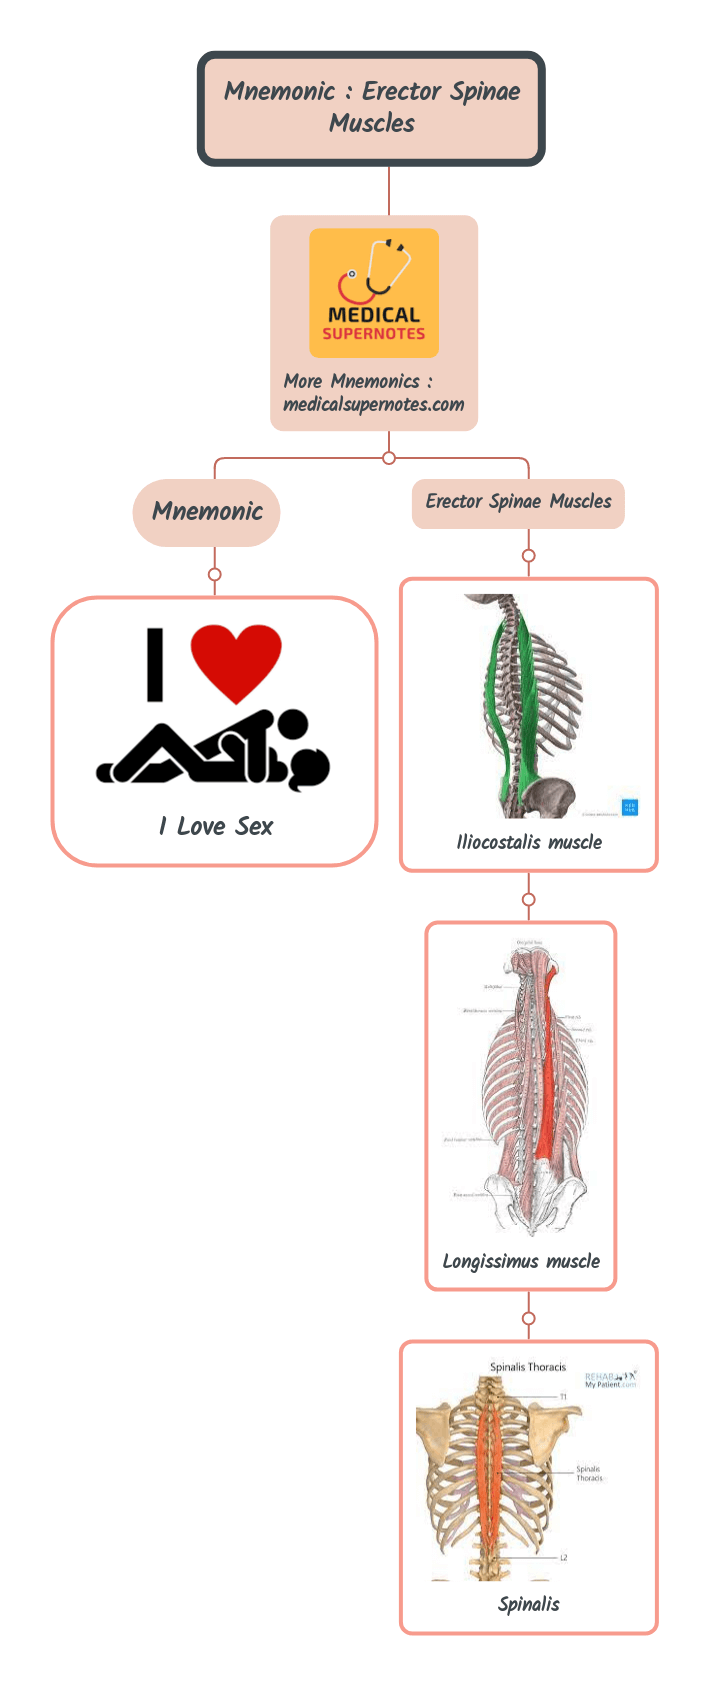 Mnemonic _ Erector Spinae Muscles